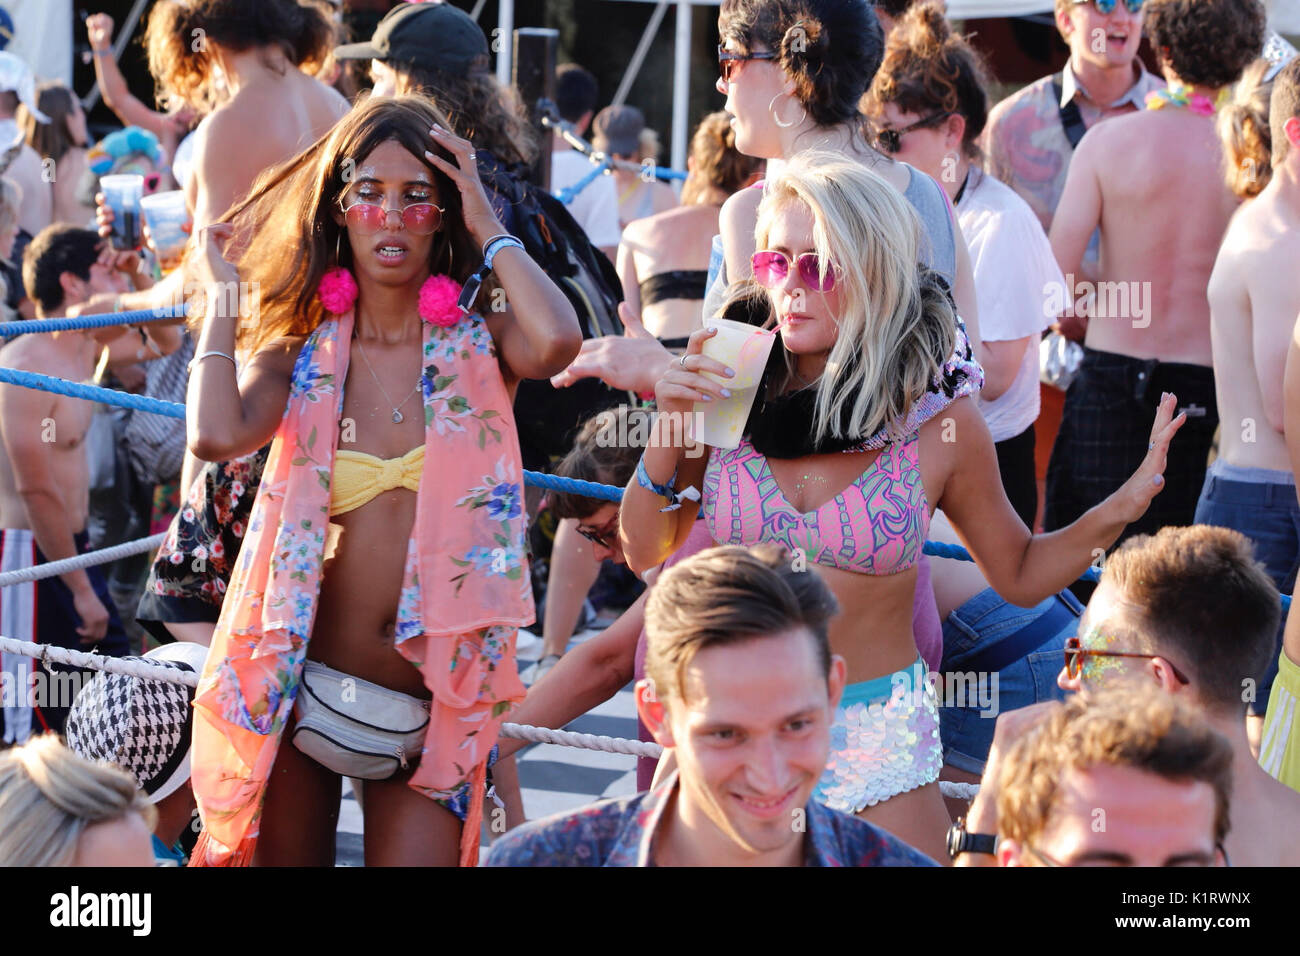 Northampton, UK. 27th August, 2017. 27th August 2017. Shambala festival, Northampton. Last day at the alternative festival famed for authentic music, crazy fancy dress and enthusiastic energy. Festival goers bask in the hot sunshine as temperatures continue to soar over rhe bank holiday weekend on the Kelmarsh Estate. Credit: Wayne Farrell/Alamy Live News Stock Photo